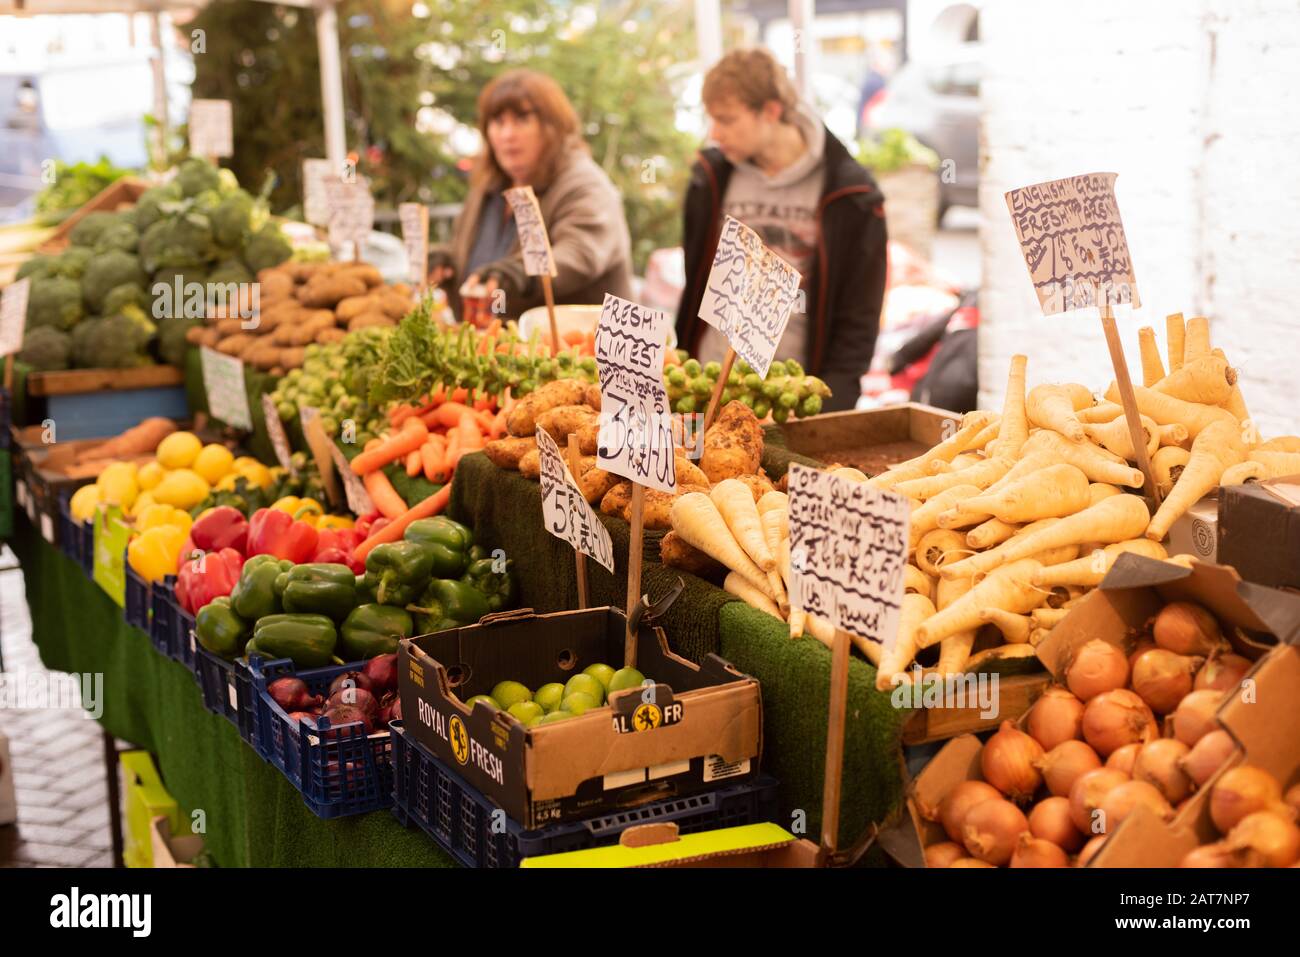 friut and veg for sale Stock Photo